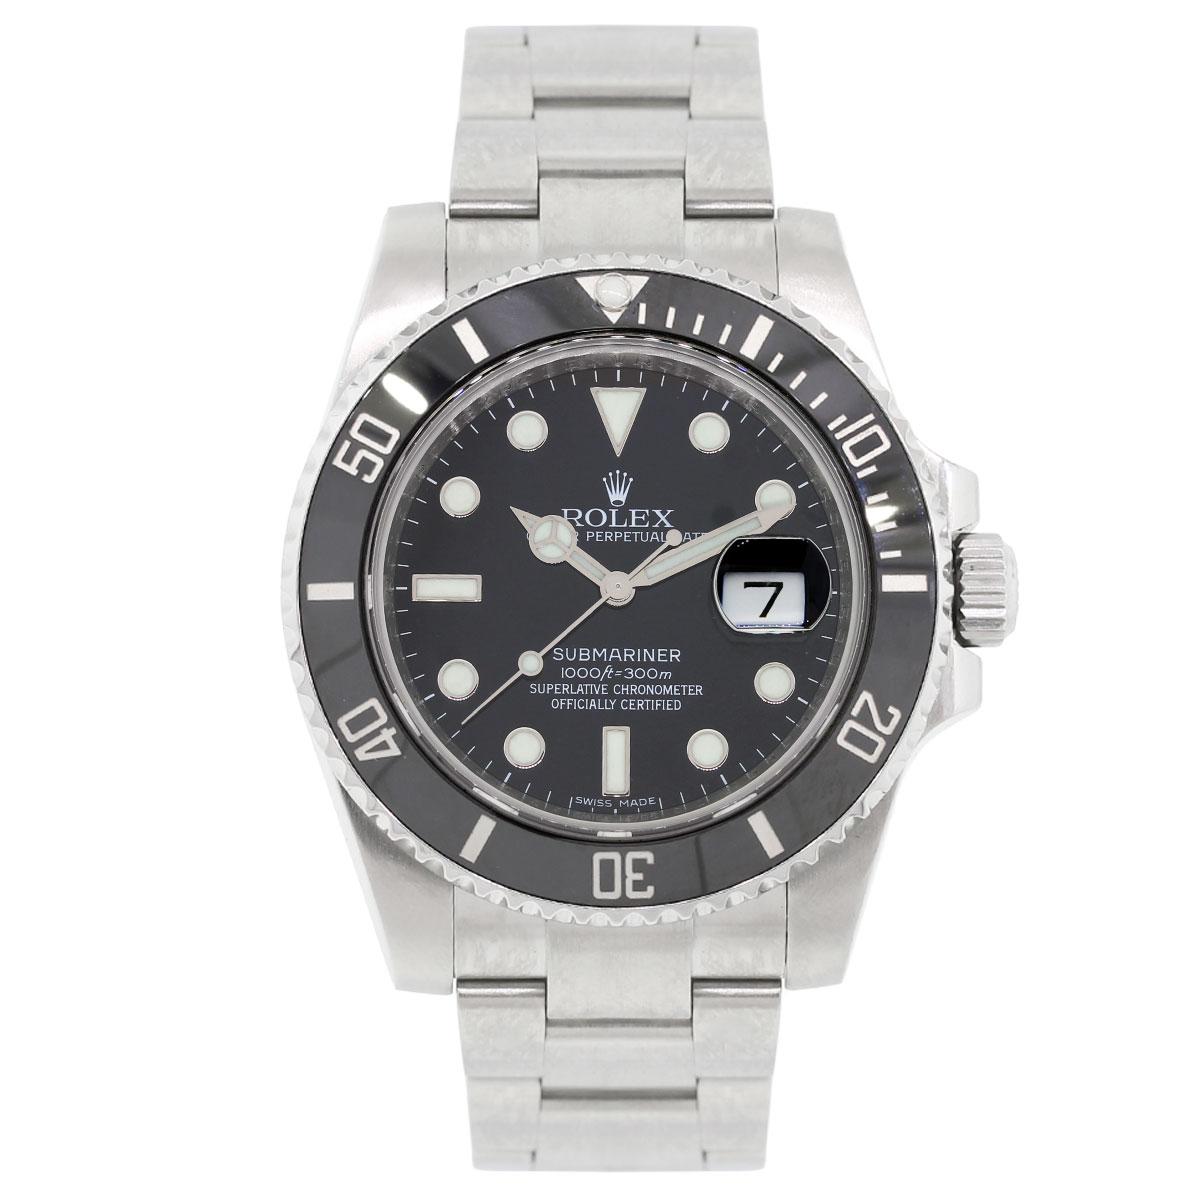 Brand: Rolex
MPN: 116610
Model: Submariner
Case Material: Stainless Steel
Case Diameter: 40mm
Crystal: Sapphire crystal
Bezel: Unidirectional ceramic black bezel
Dial: Black dial with date window at the 3 o’clock position
Bracelet: Stainless steel